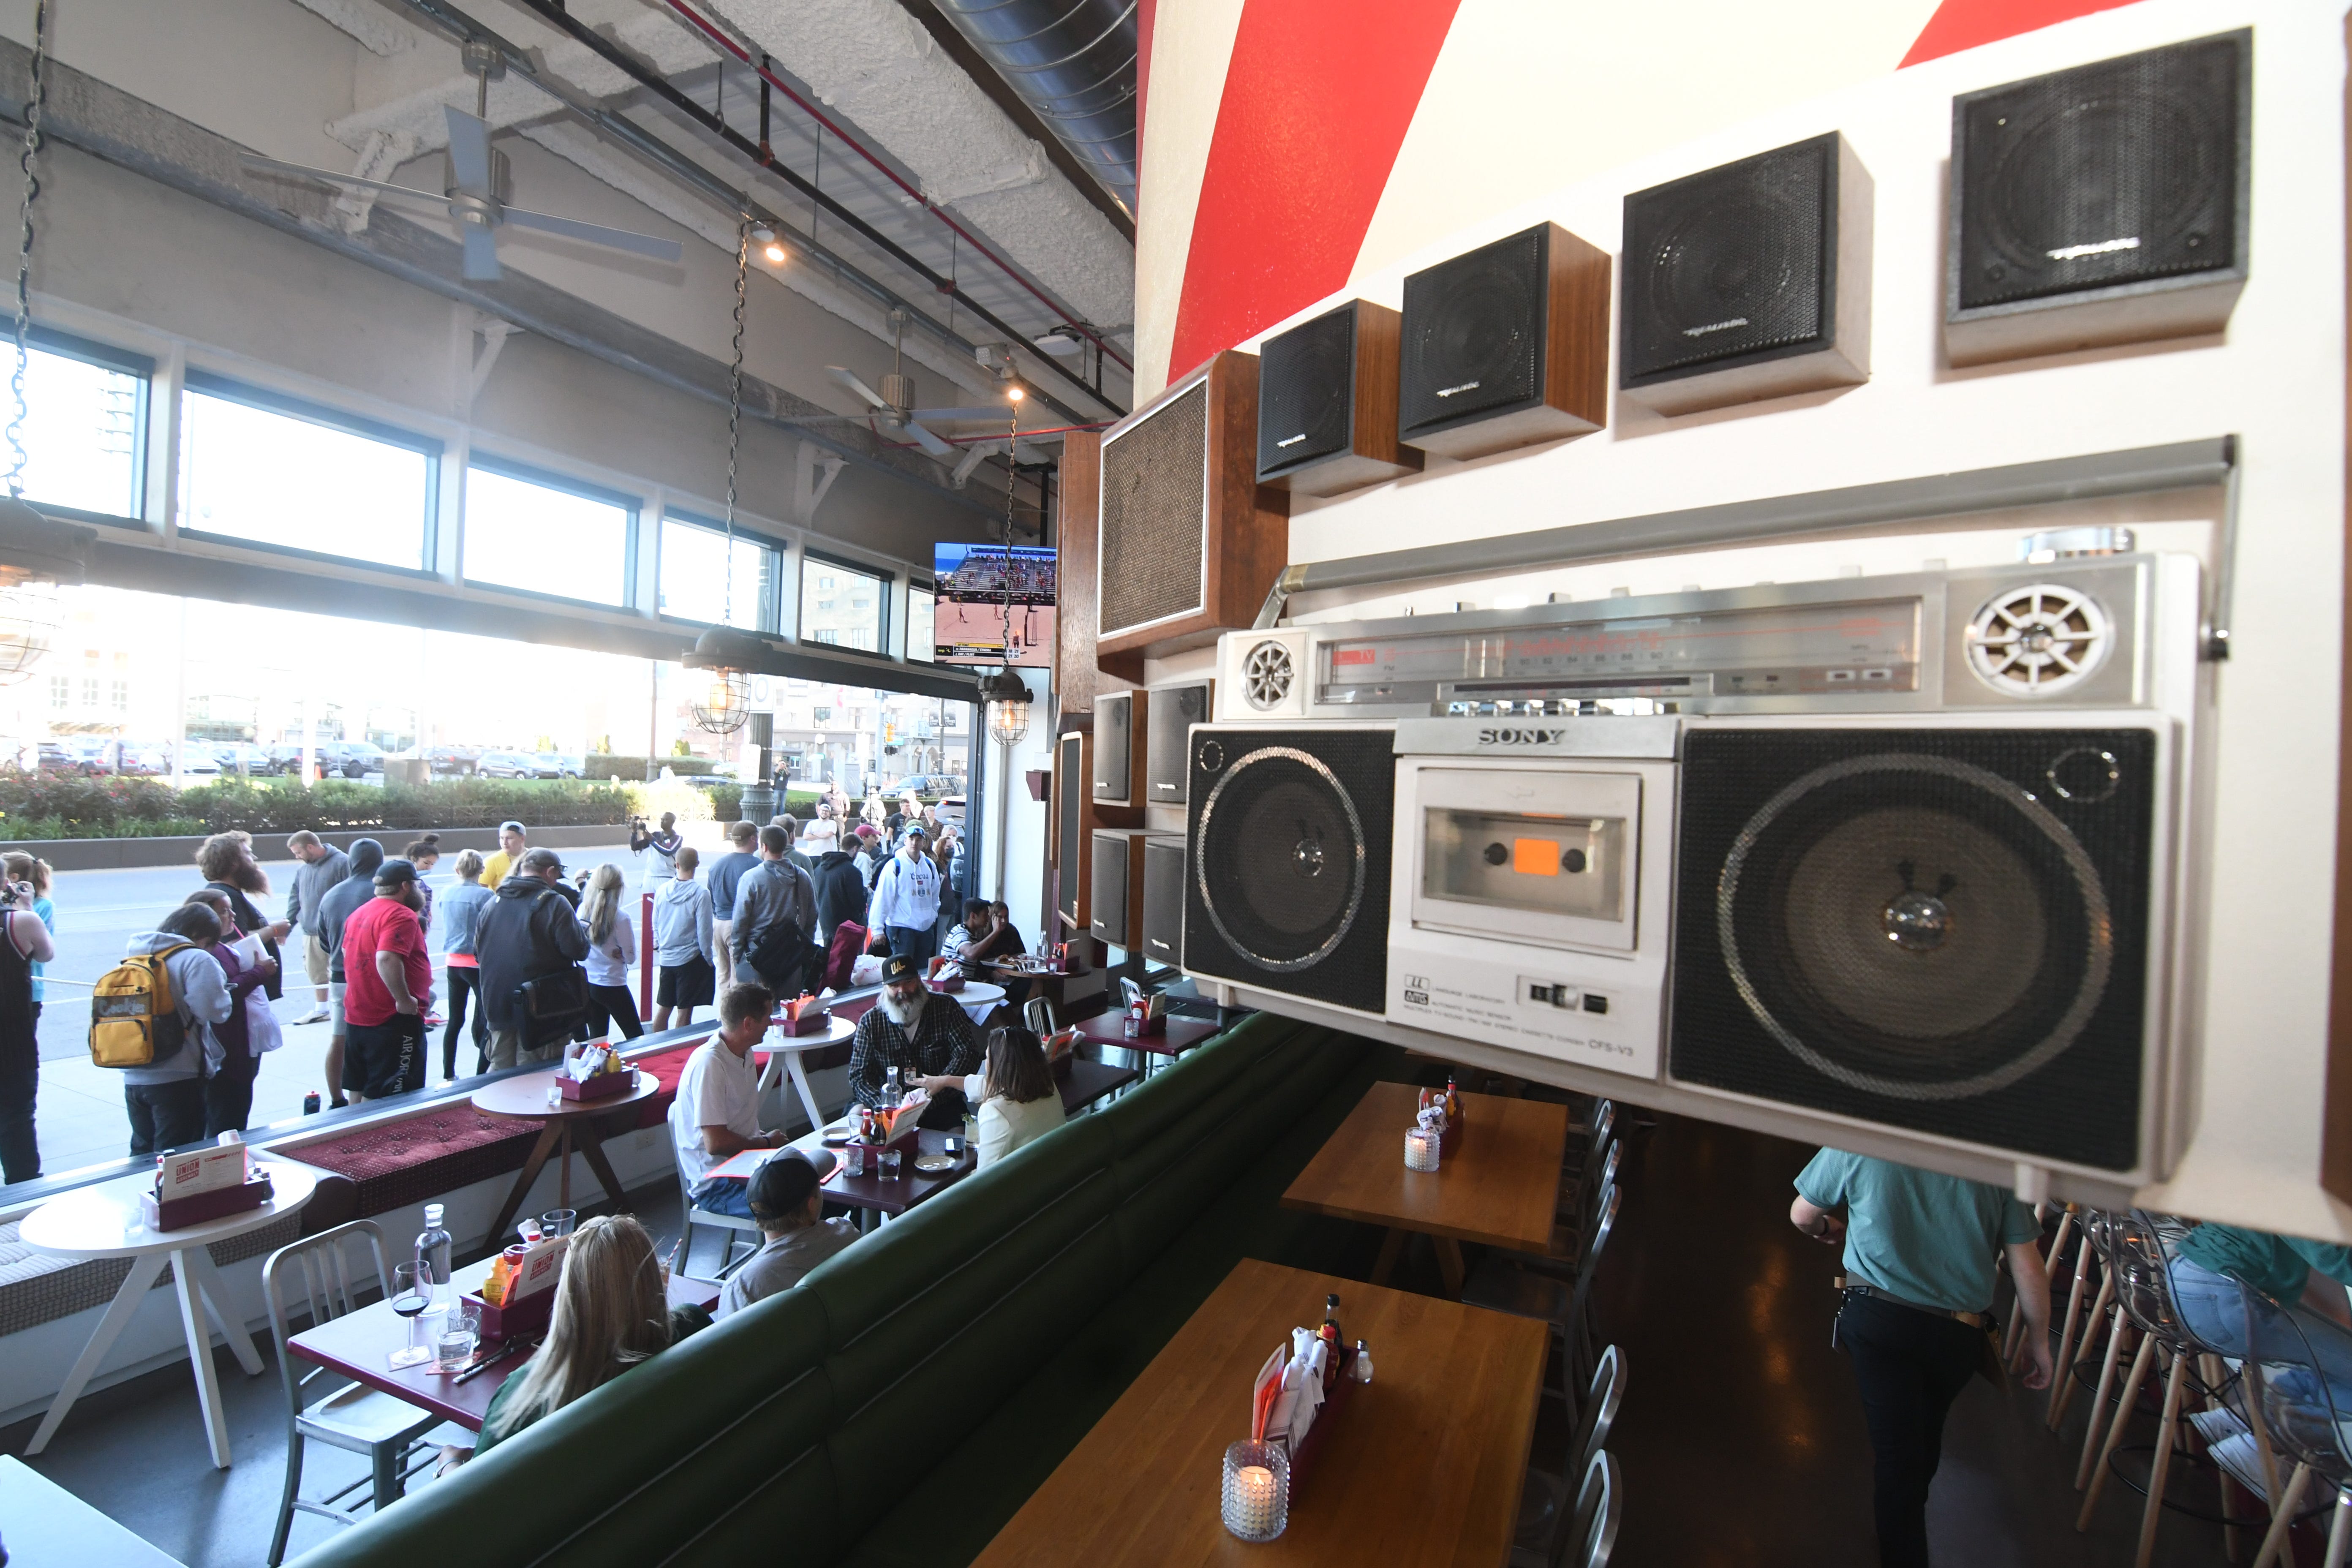 Vintage boomboxes are seen at the Union Assembly restaurant where people wait in line to get Mom's Spaghetti, Wednesday, September 29, 2021.